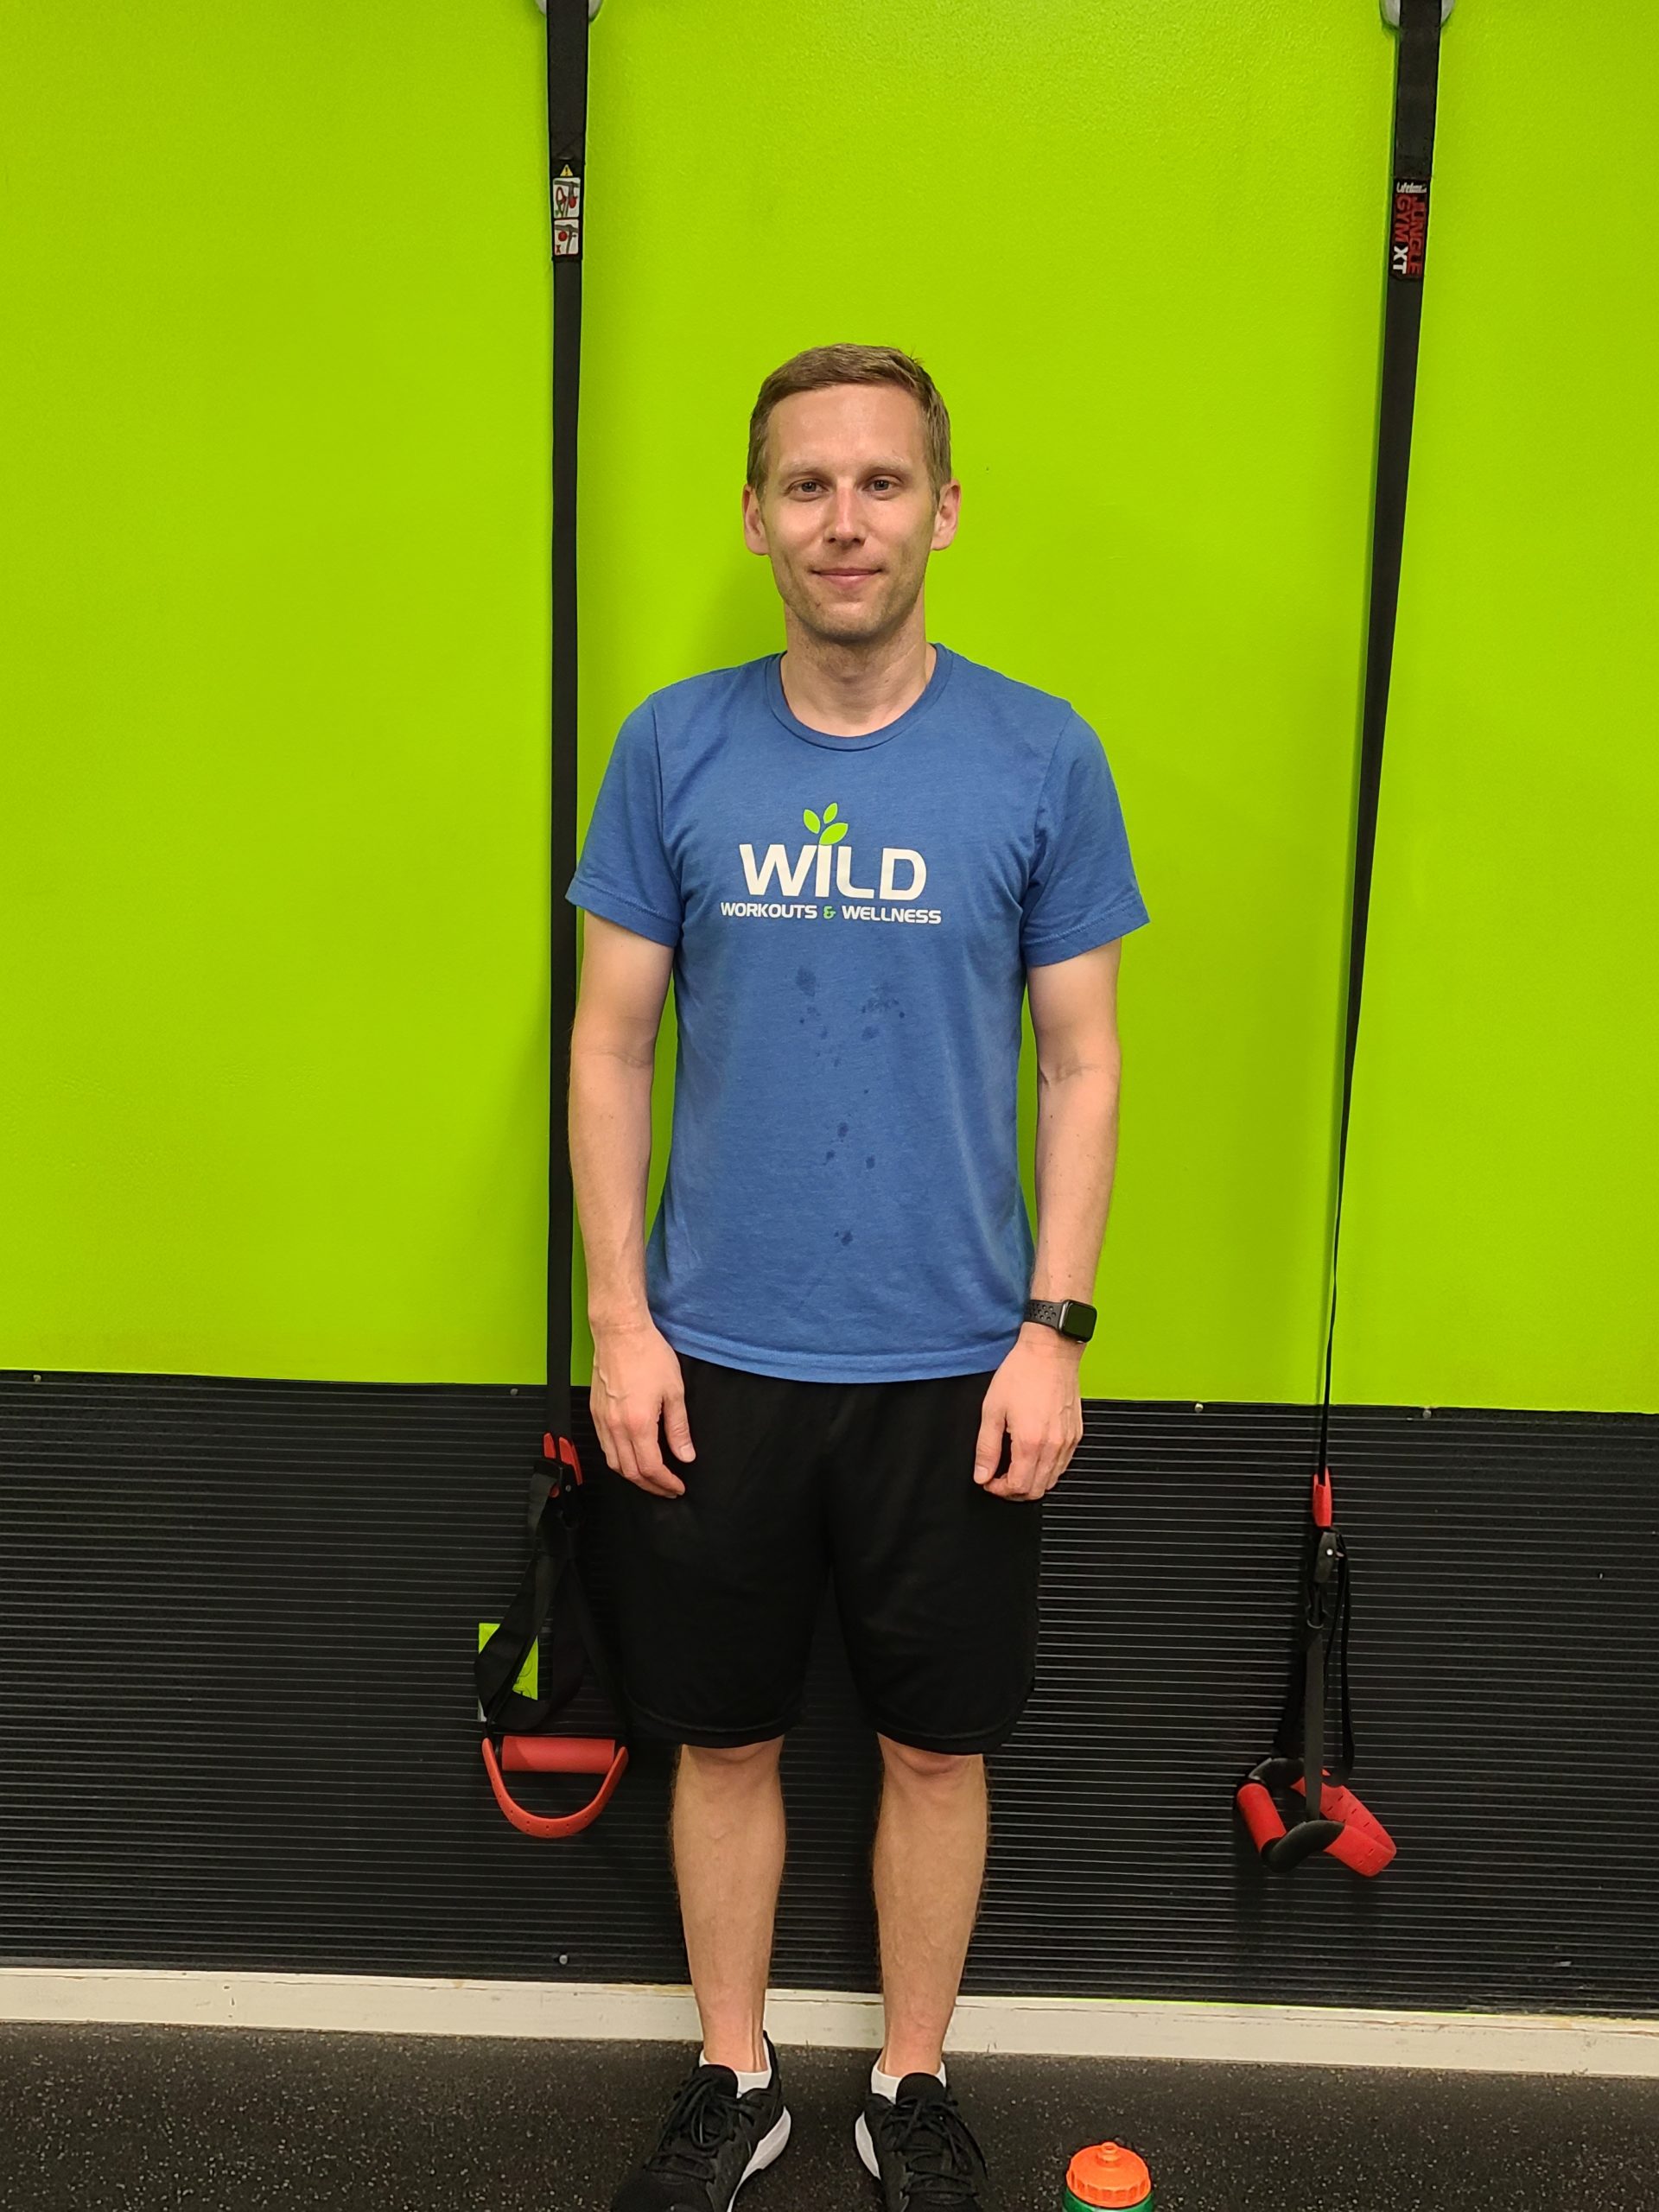 June Client of the Month – Mark K.